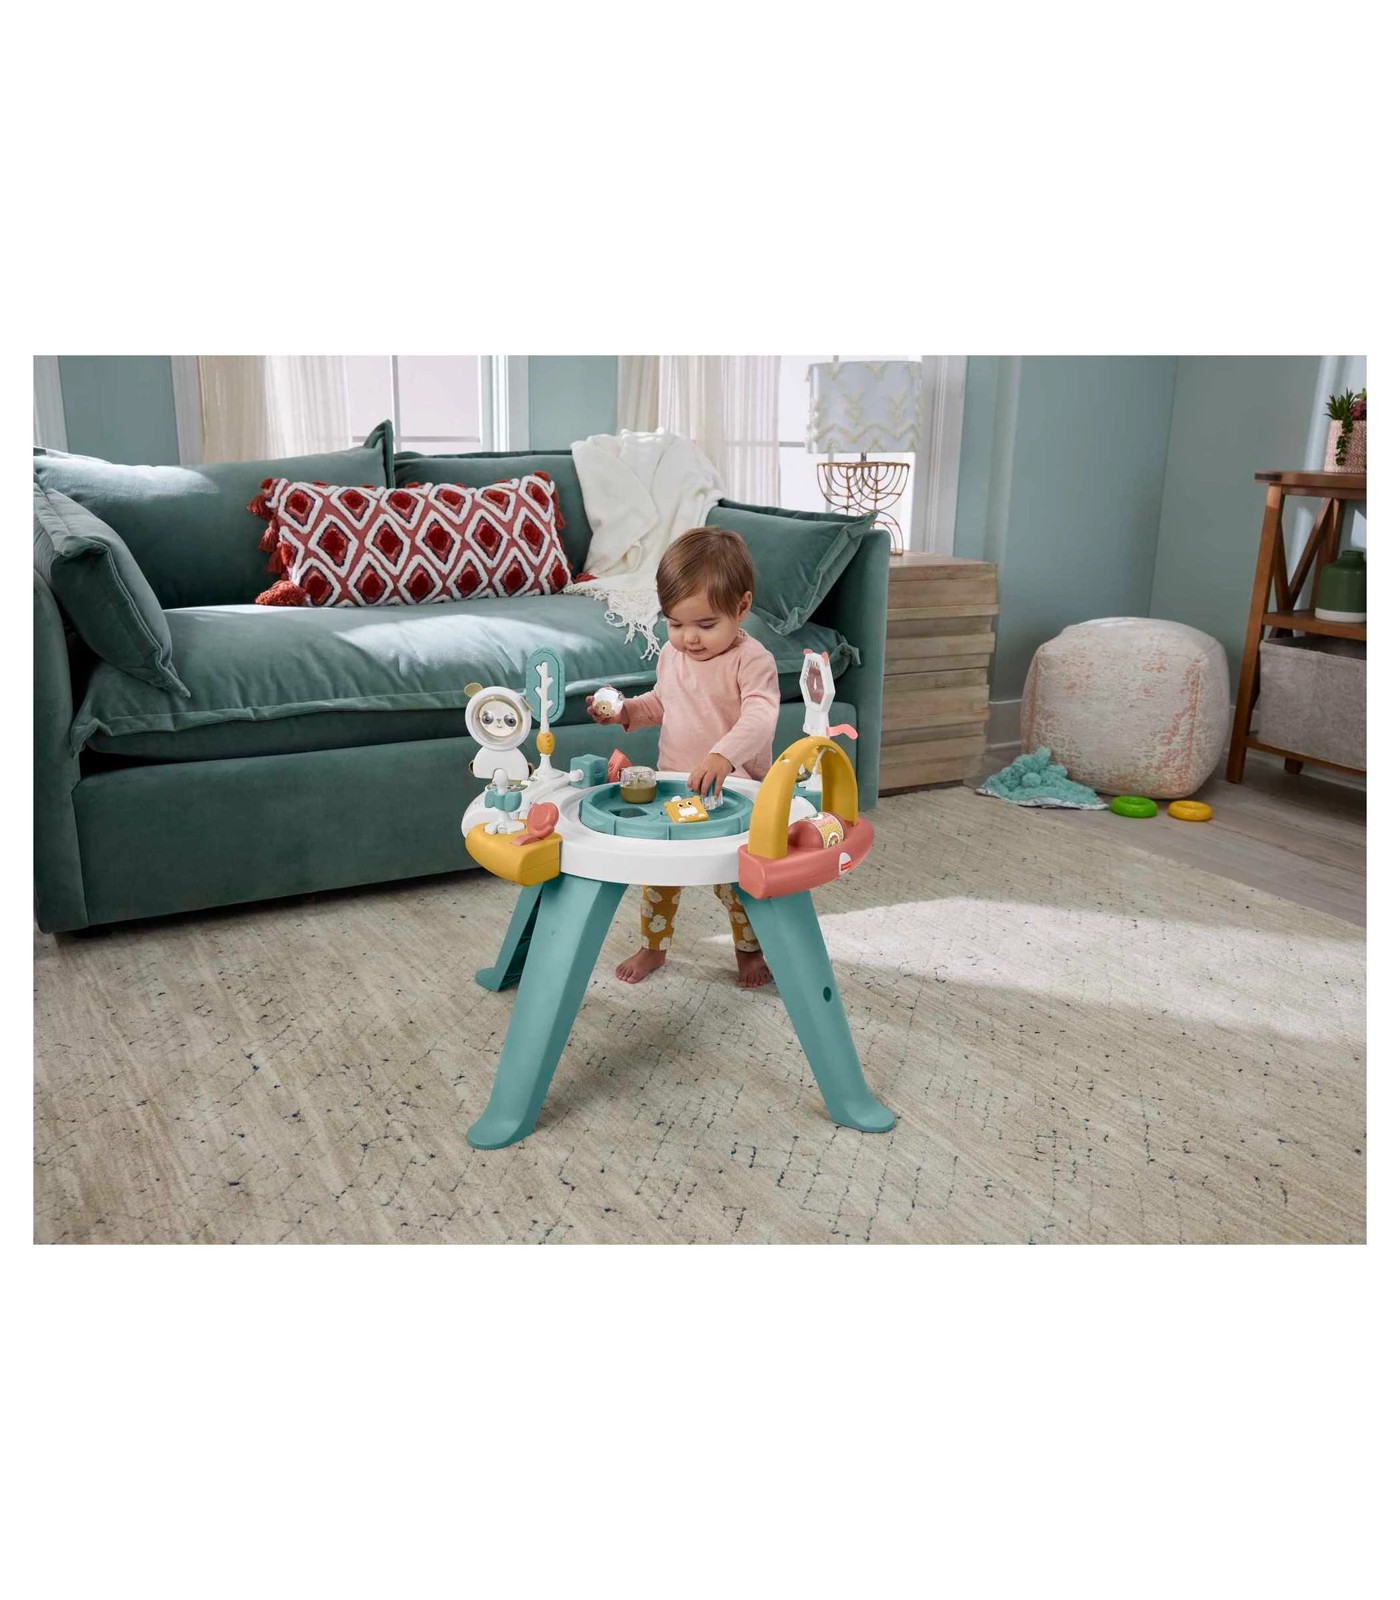 Fisher-Price 3-In-1 Spin & Sort Activity Center